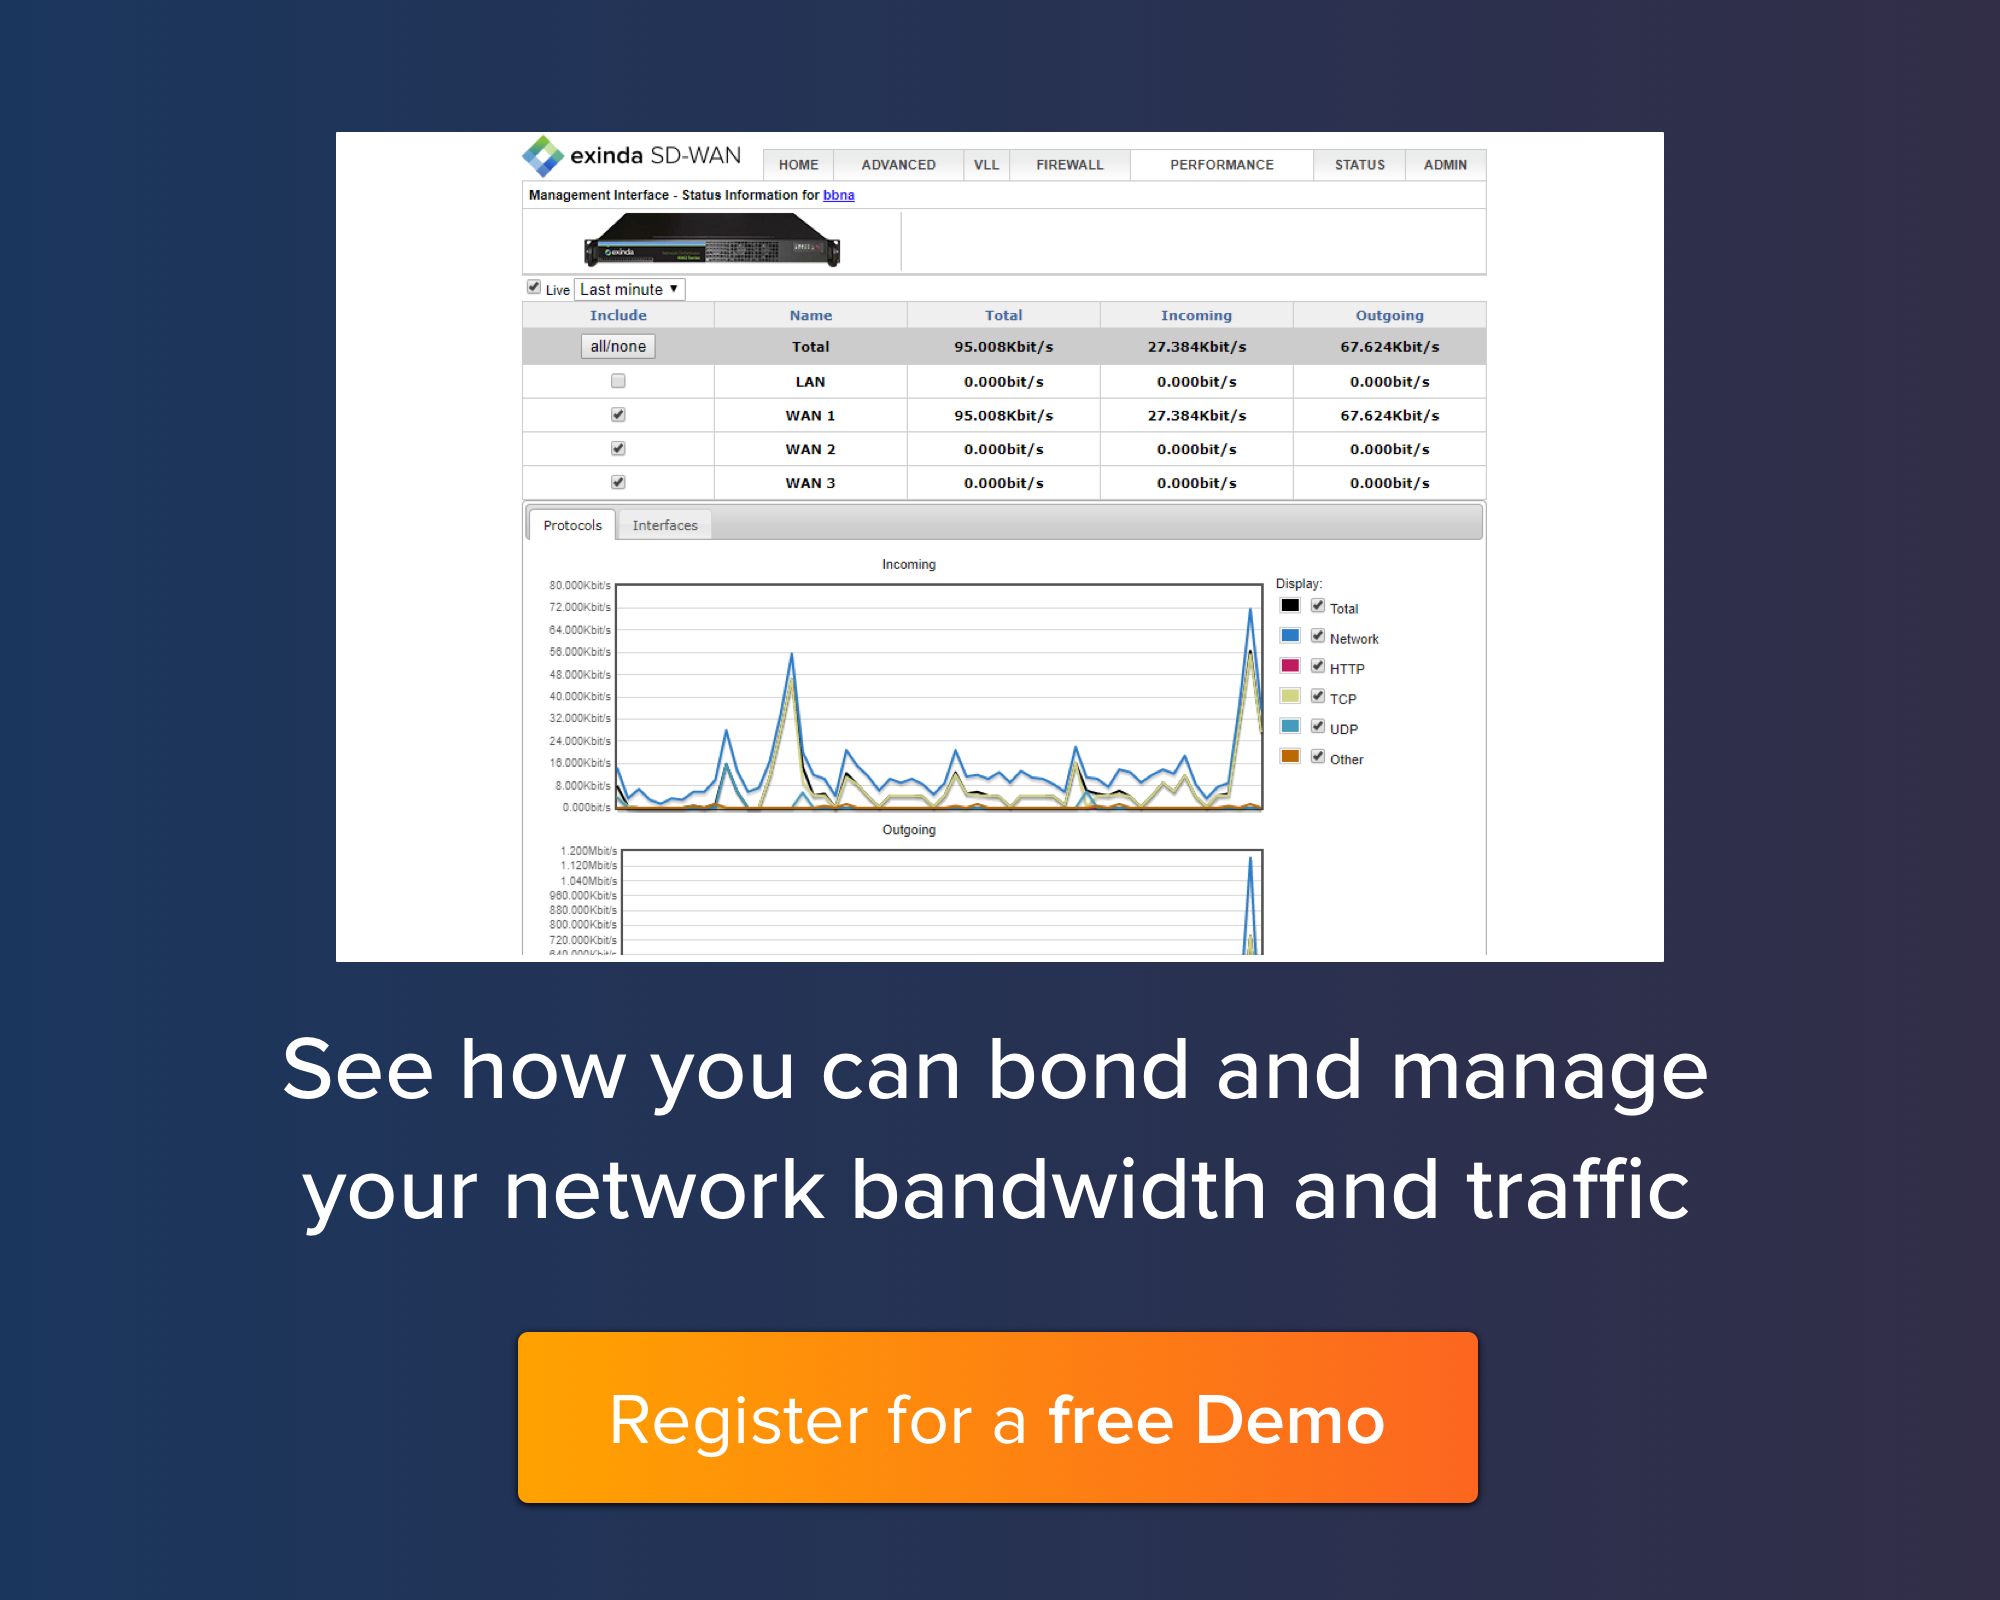 See how you can bond and manage your network bandwidth and traffic